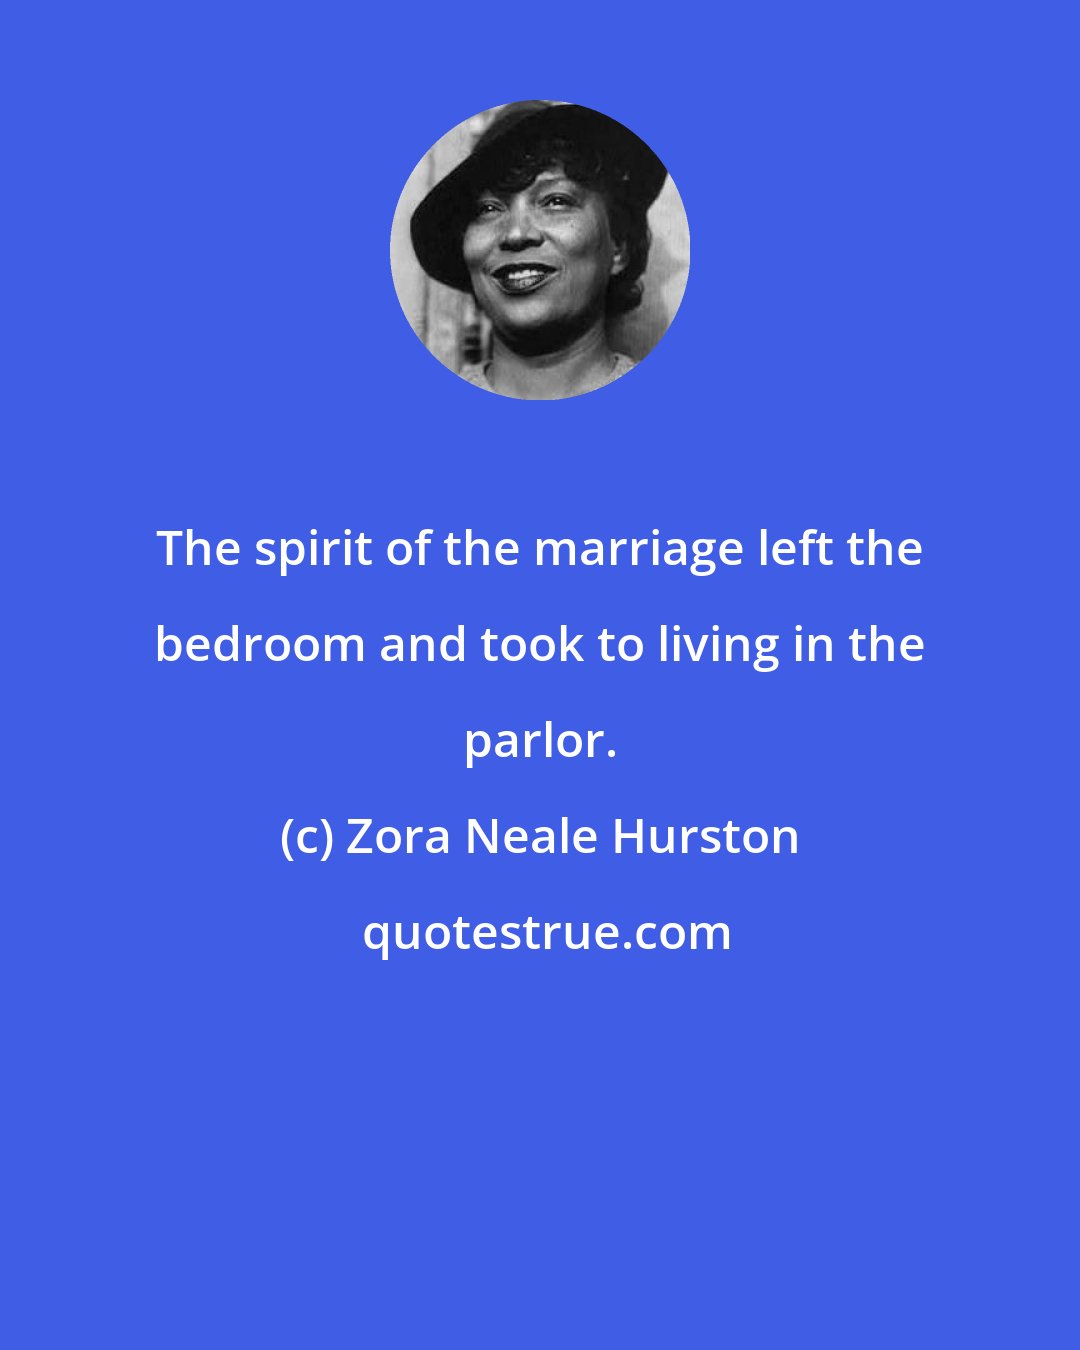 Zora Neale Hurston: The spirit of the marriage left the bedroom and took to living in the parlor.